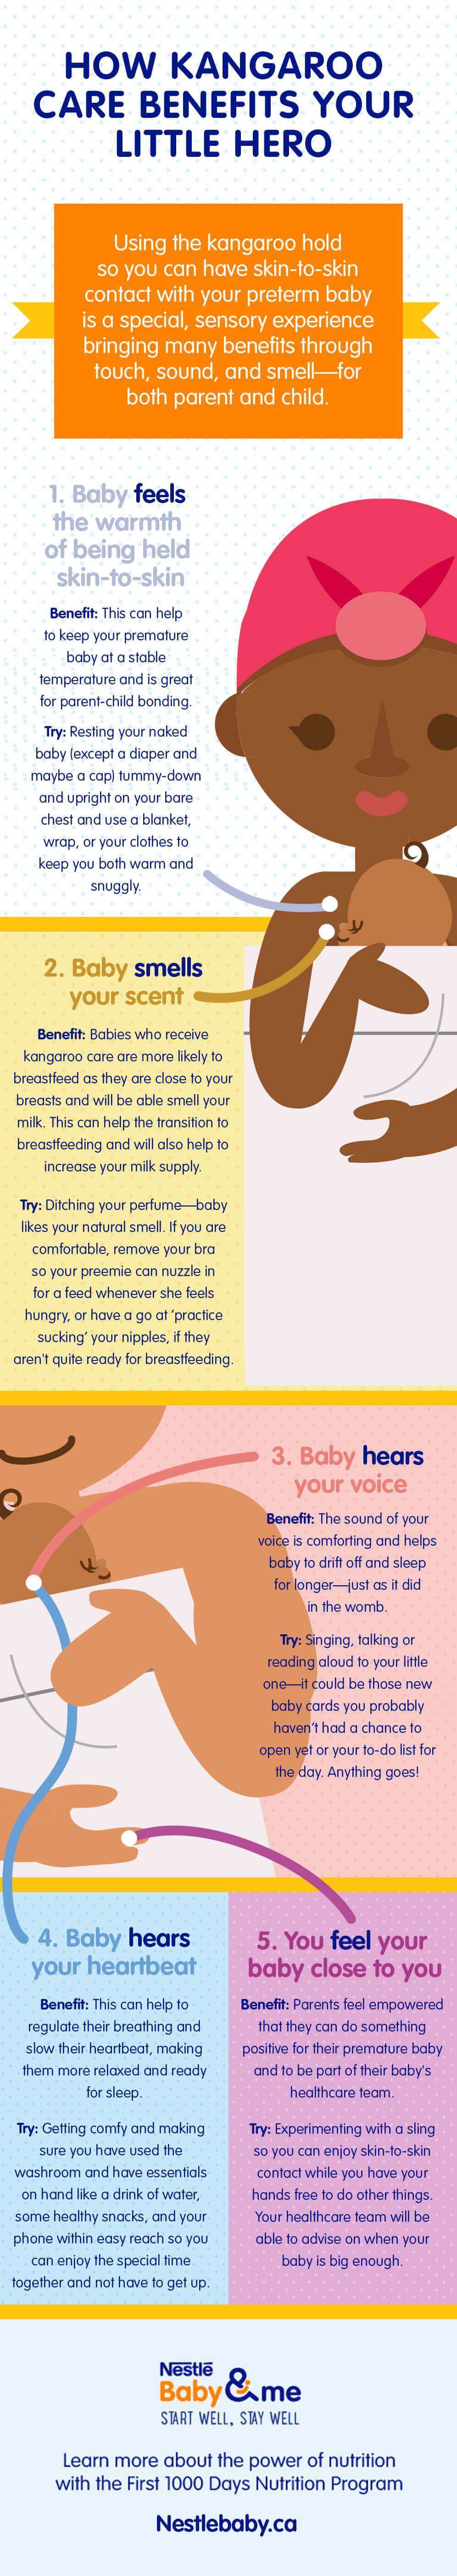 Kangaroo care: How to take care of your preterm baby 